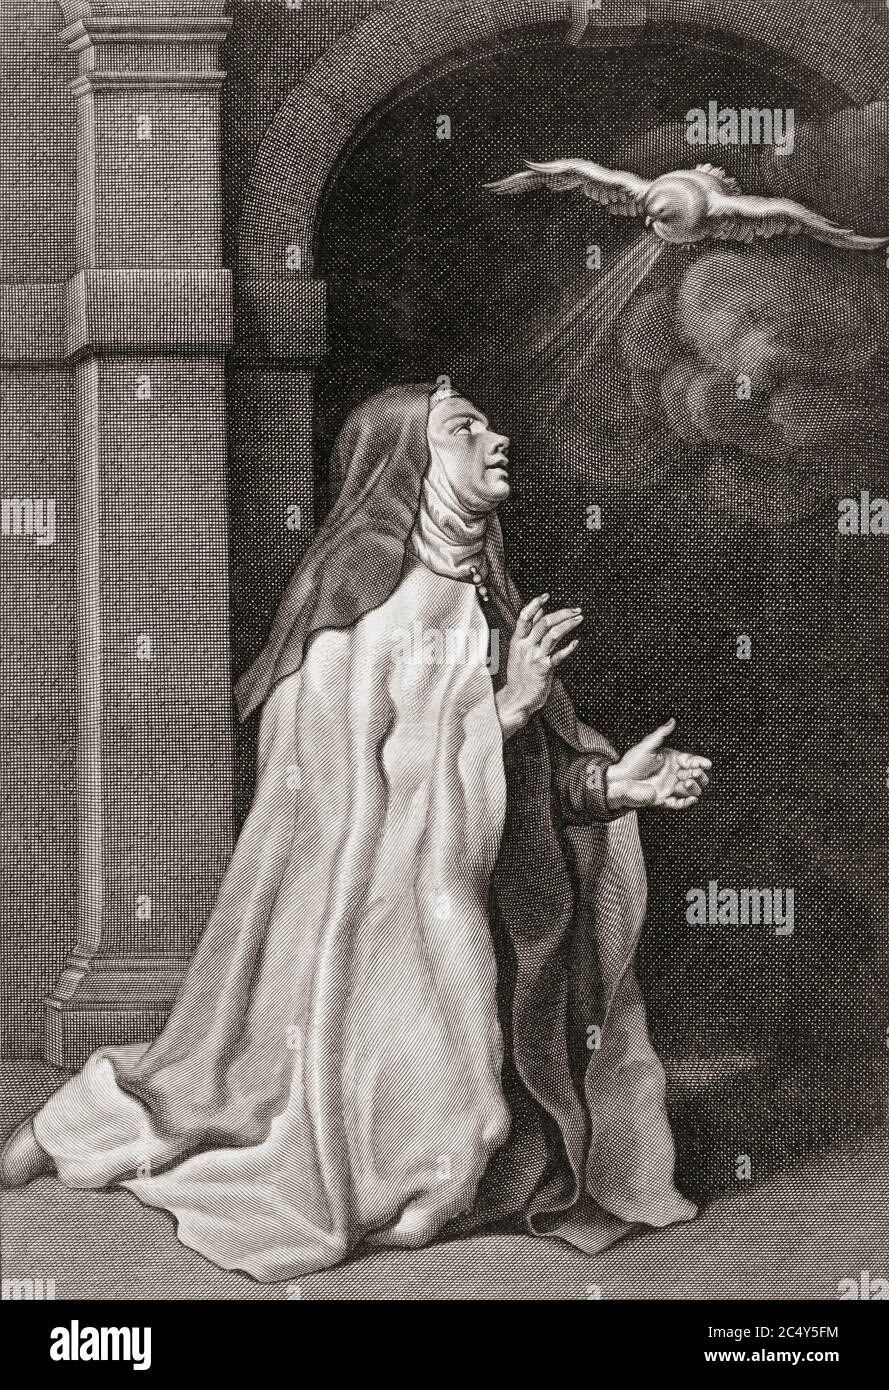 Saint Teresa of Ávila, baptized Teresa Sánchez de Cepeda y Ahumada, 1515 – 1582.  Spanish mystic, Roman Catholic saint.  She is depicted receiving a vision.  After an engraving by Pieter van Schuppen from a work by Peter Paul Rubens. Stock Photo